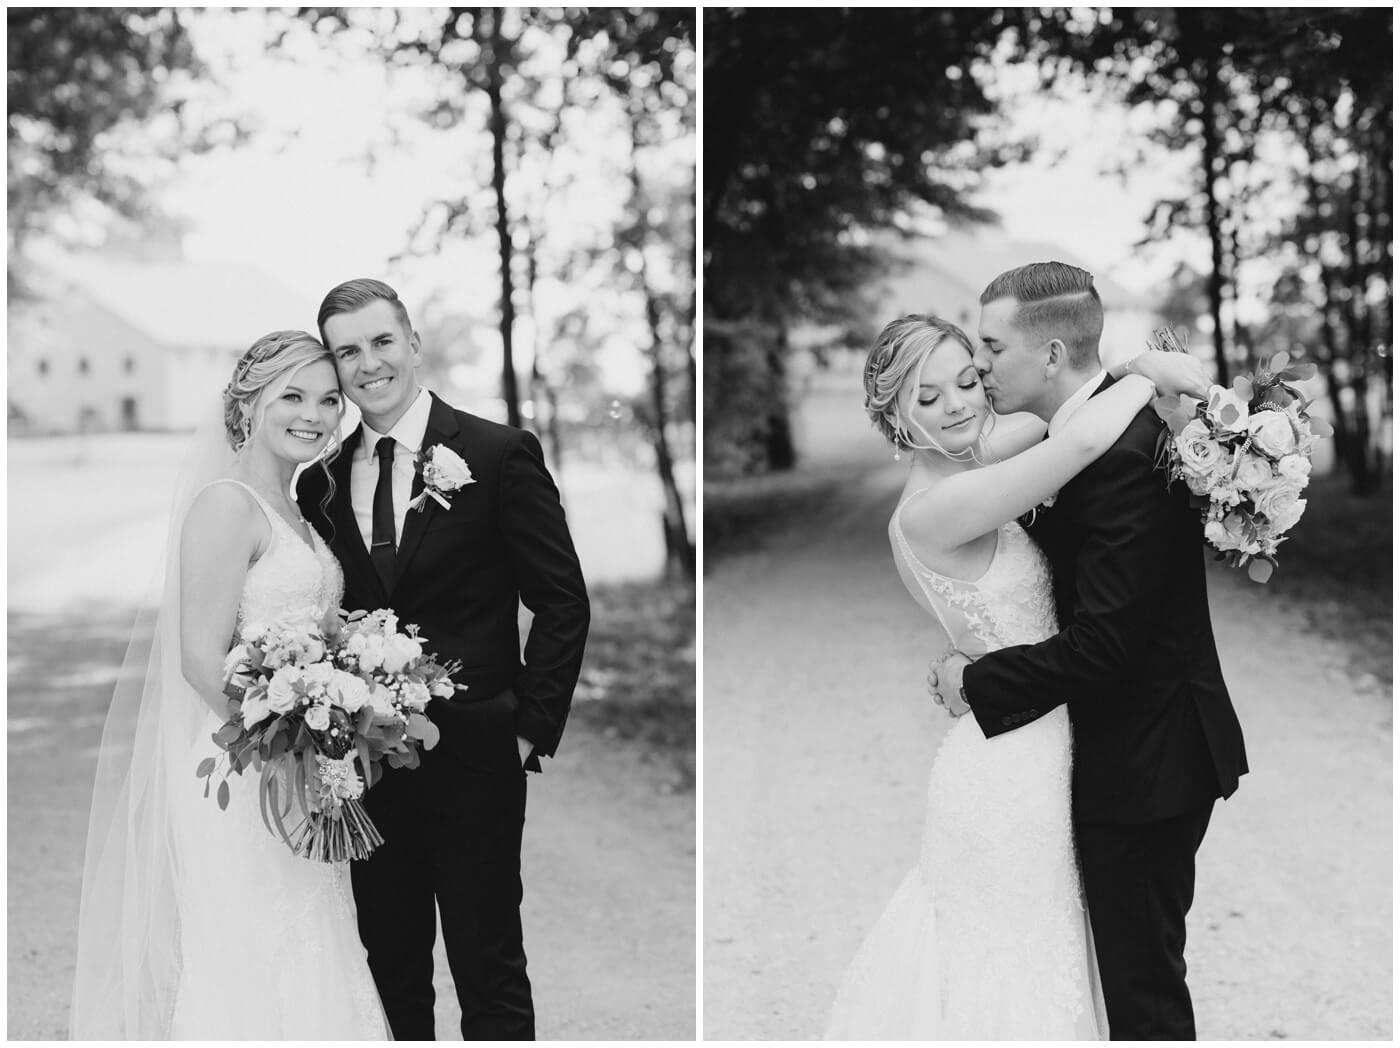 Beckendorff Farms | black and white images of a couple on their wedding day 